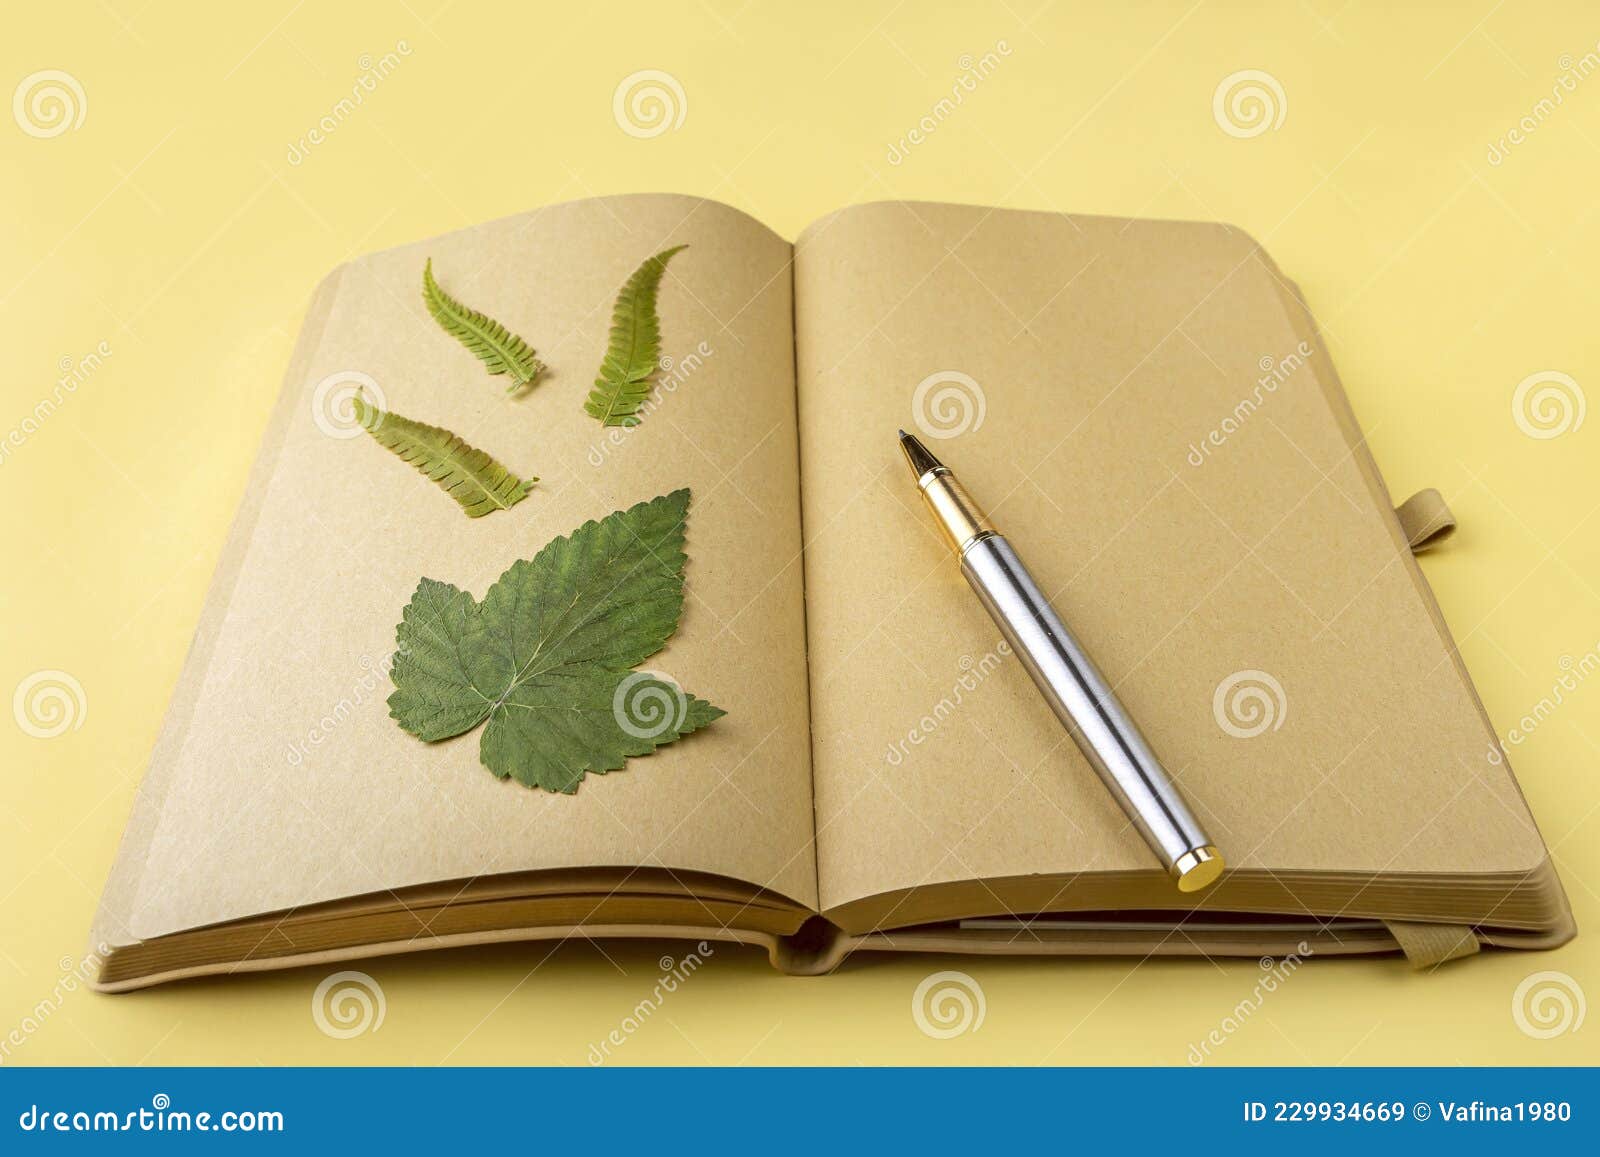 Blank Open Vintage Diary, Notebook with Herbarium of Diverse Pressed Dried  Plants and Pen. Writing Wishes, Goals, Plans, Activity Stock Image - Image  of botanical, album: 229934669